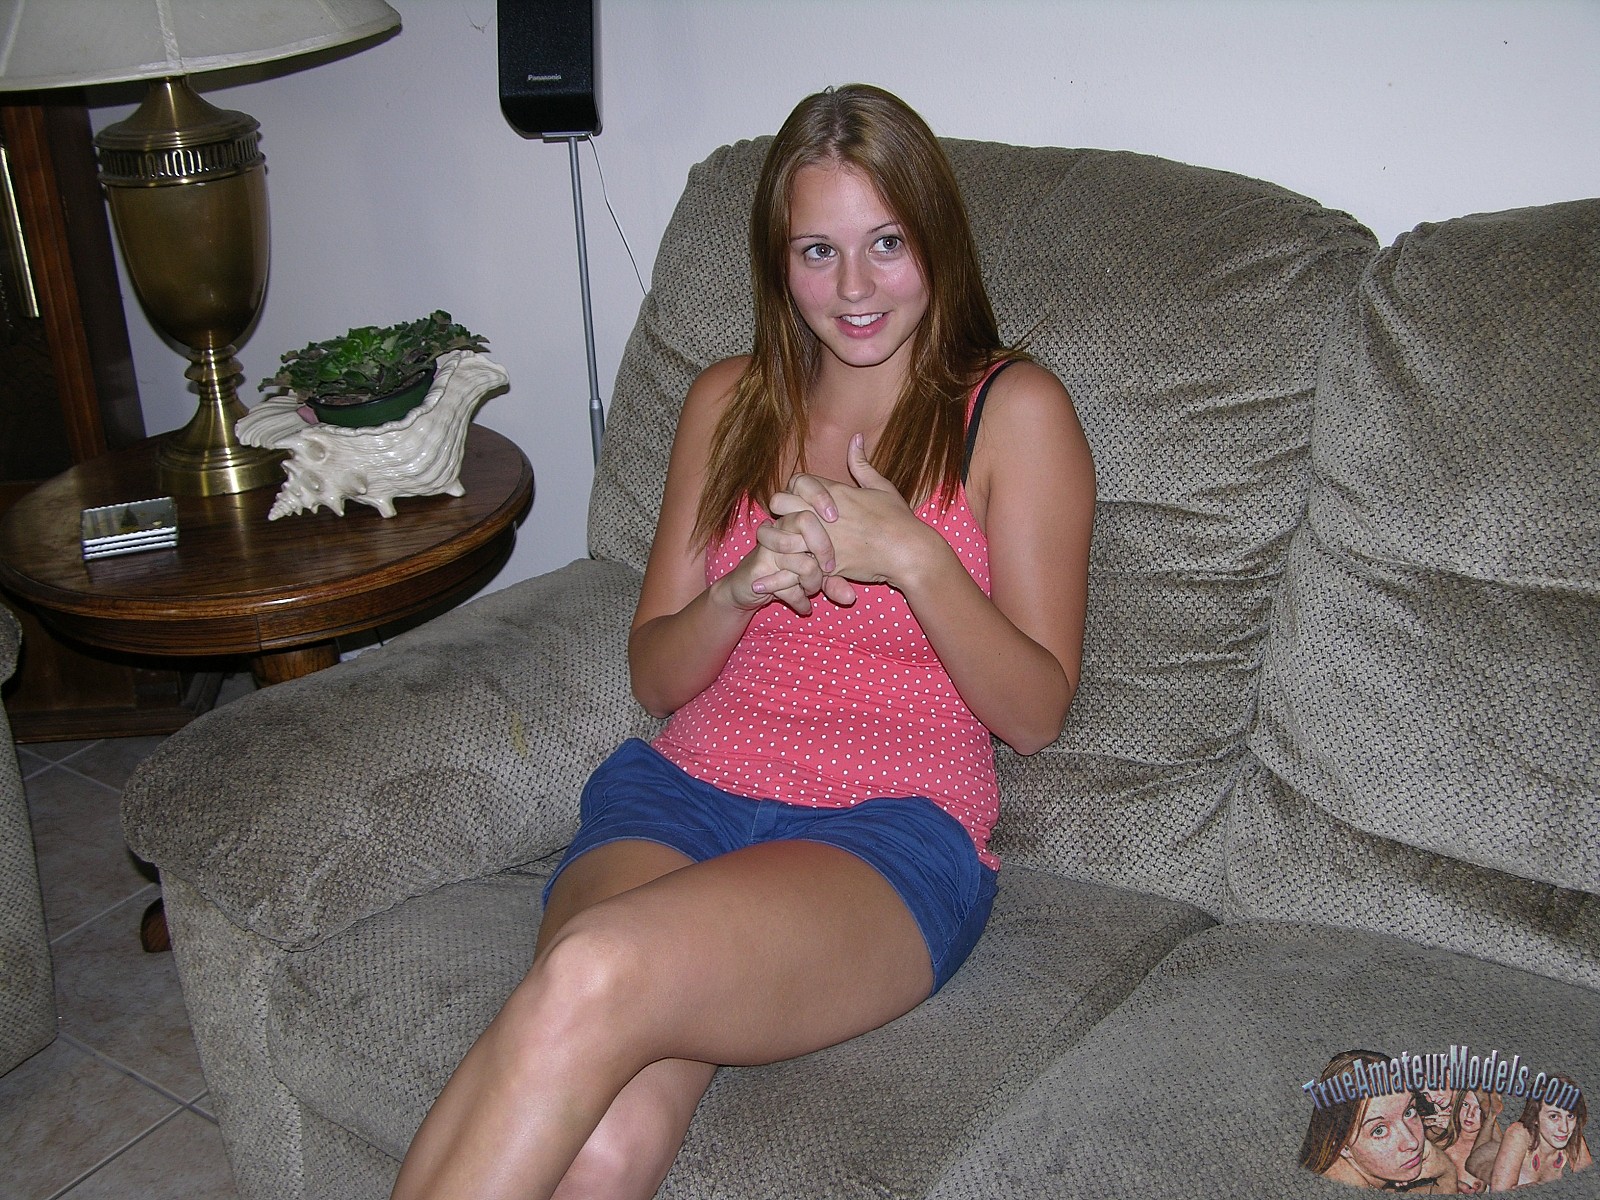 Hot amatuer teen picture gallery